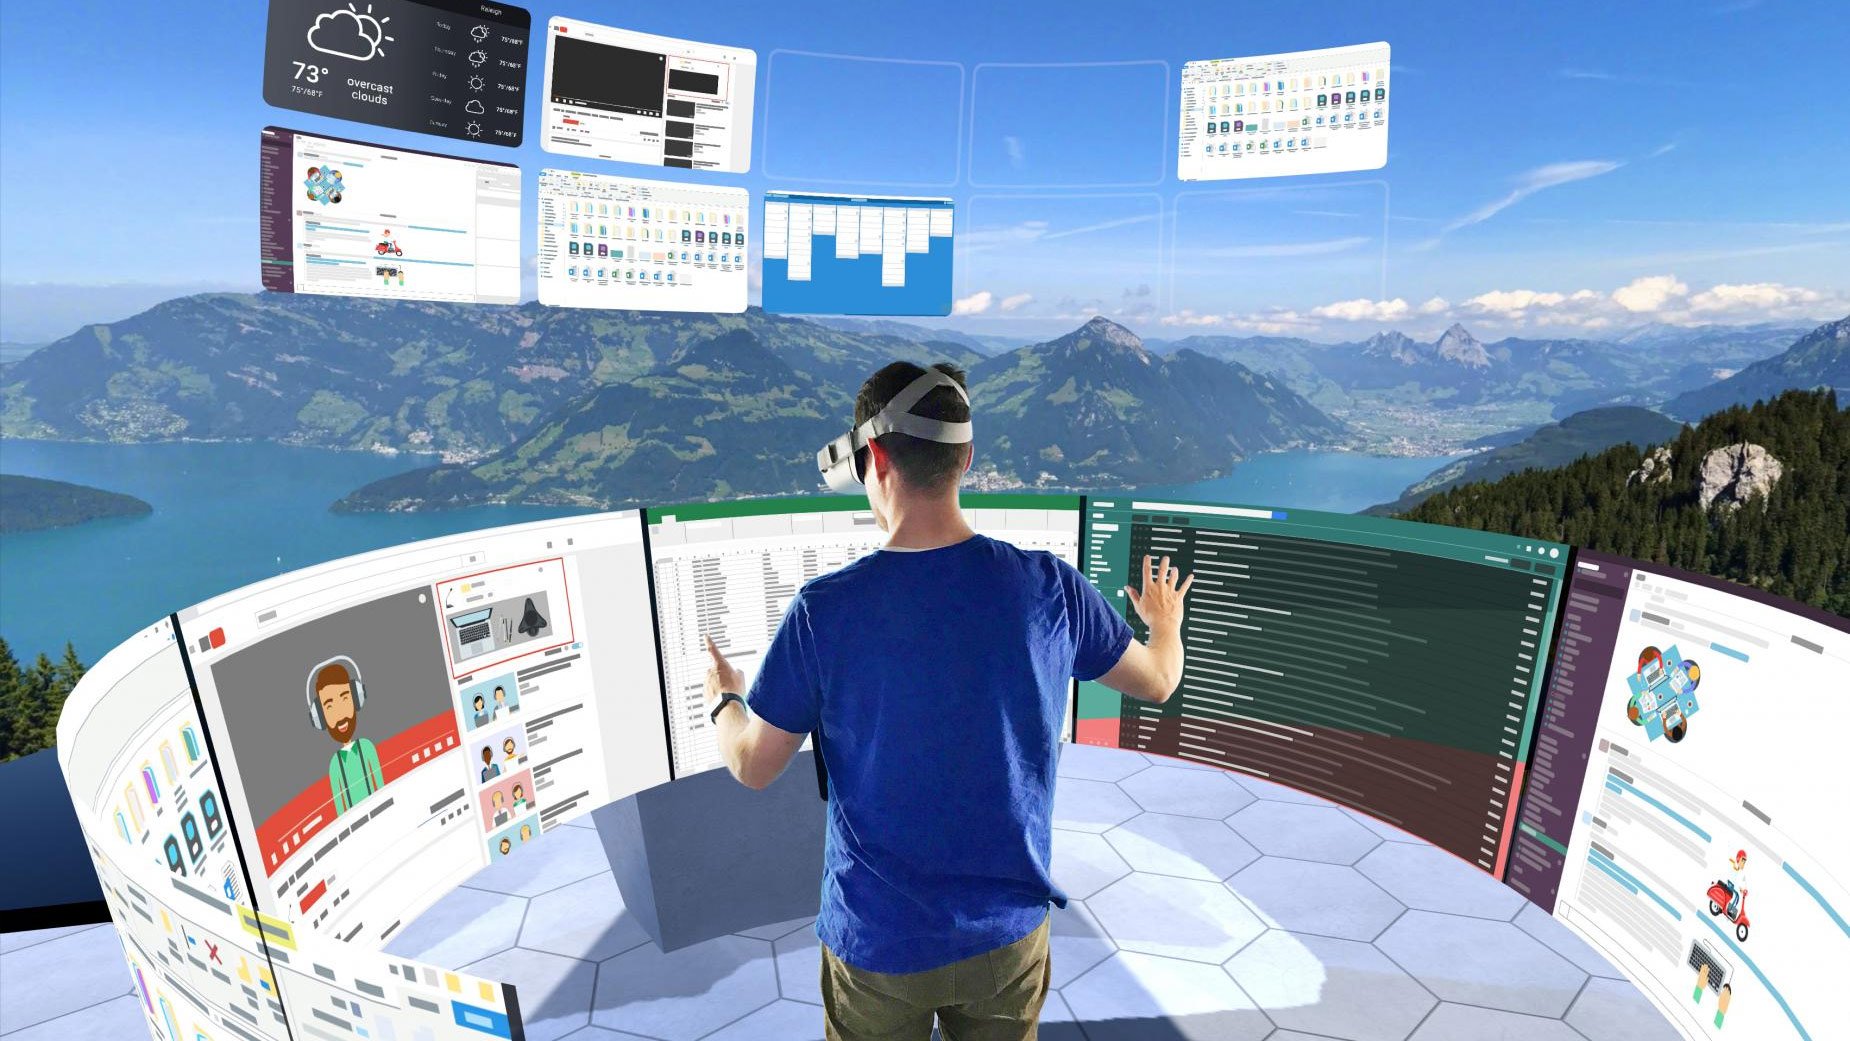 Virtual reality apps are getting a boost from Microsoft.